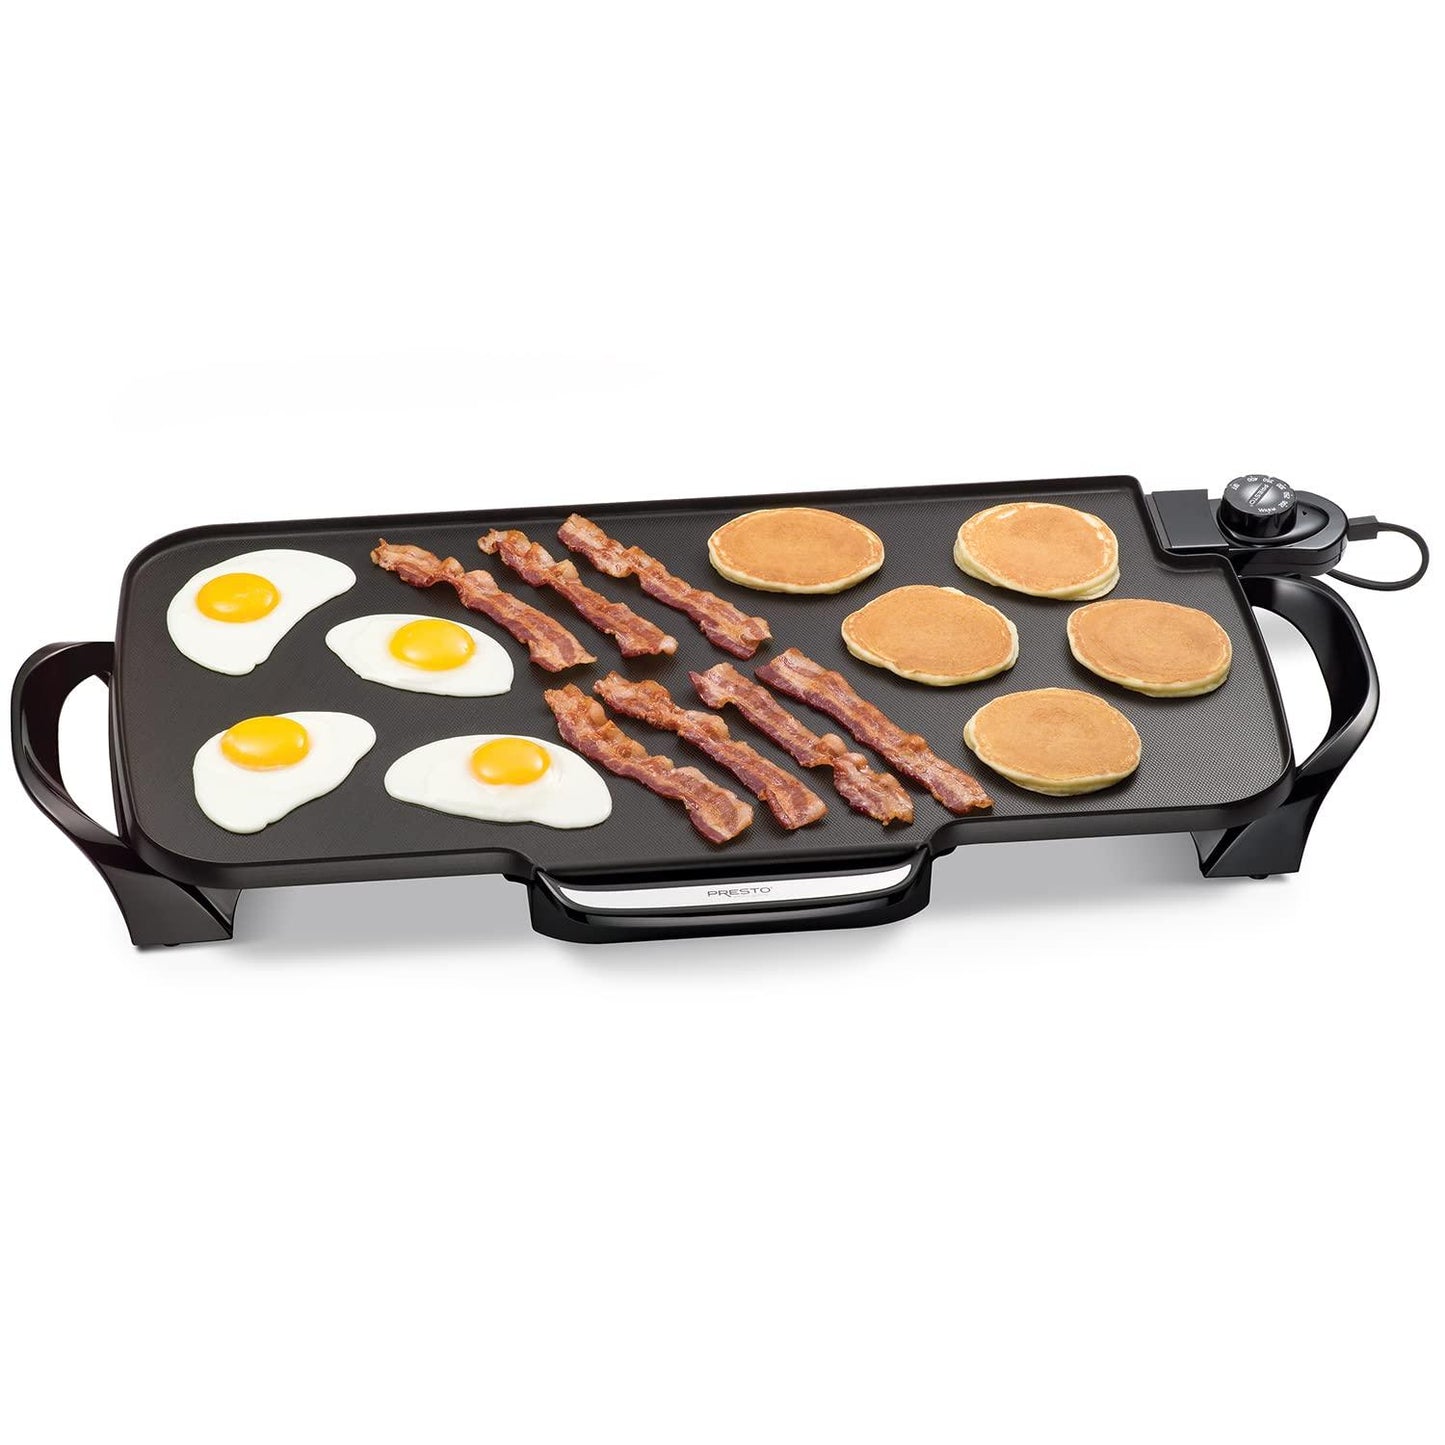 Presto 07061 22-inch Electric Griddle With Removable Handles, Black, 22-inch - CookCave